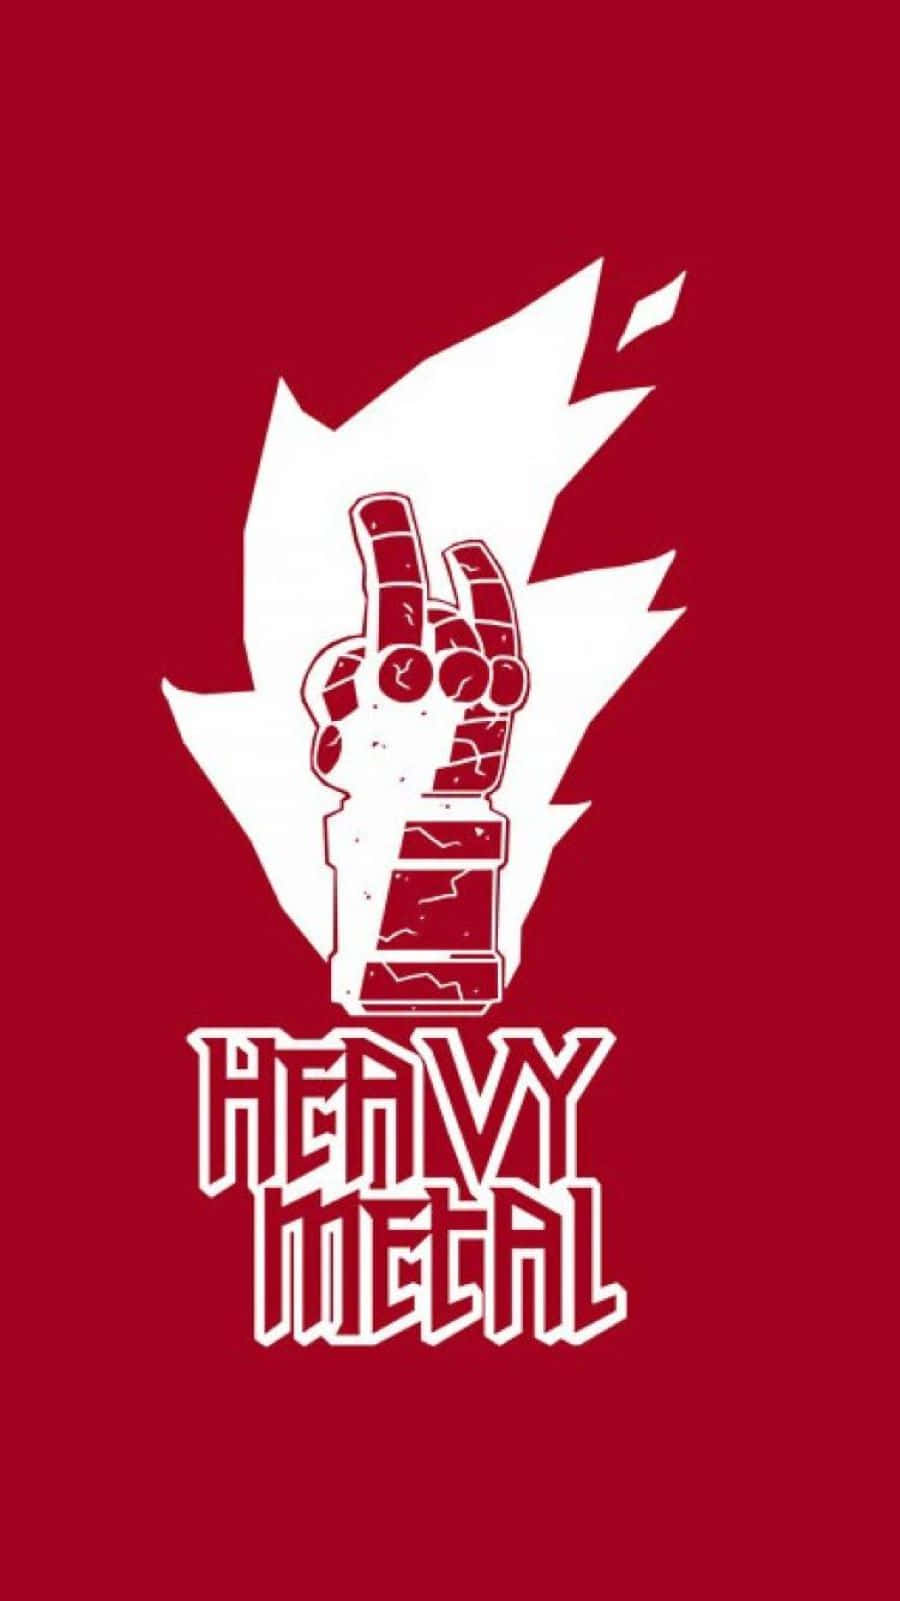 Join The Heavy Metal Music Revolution